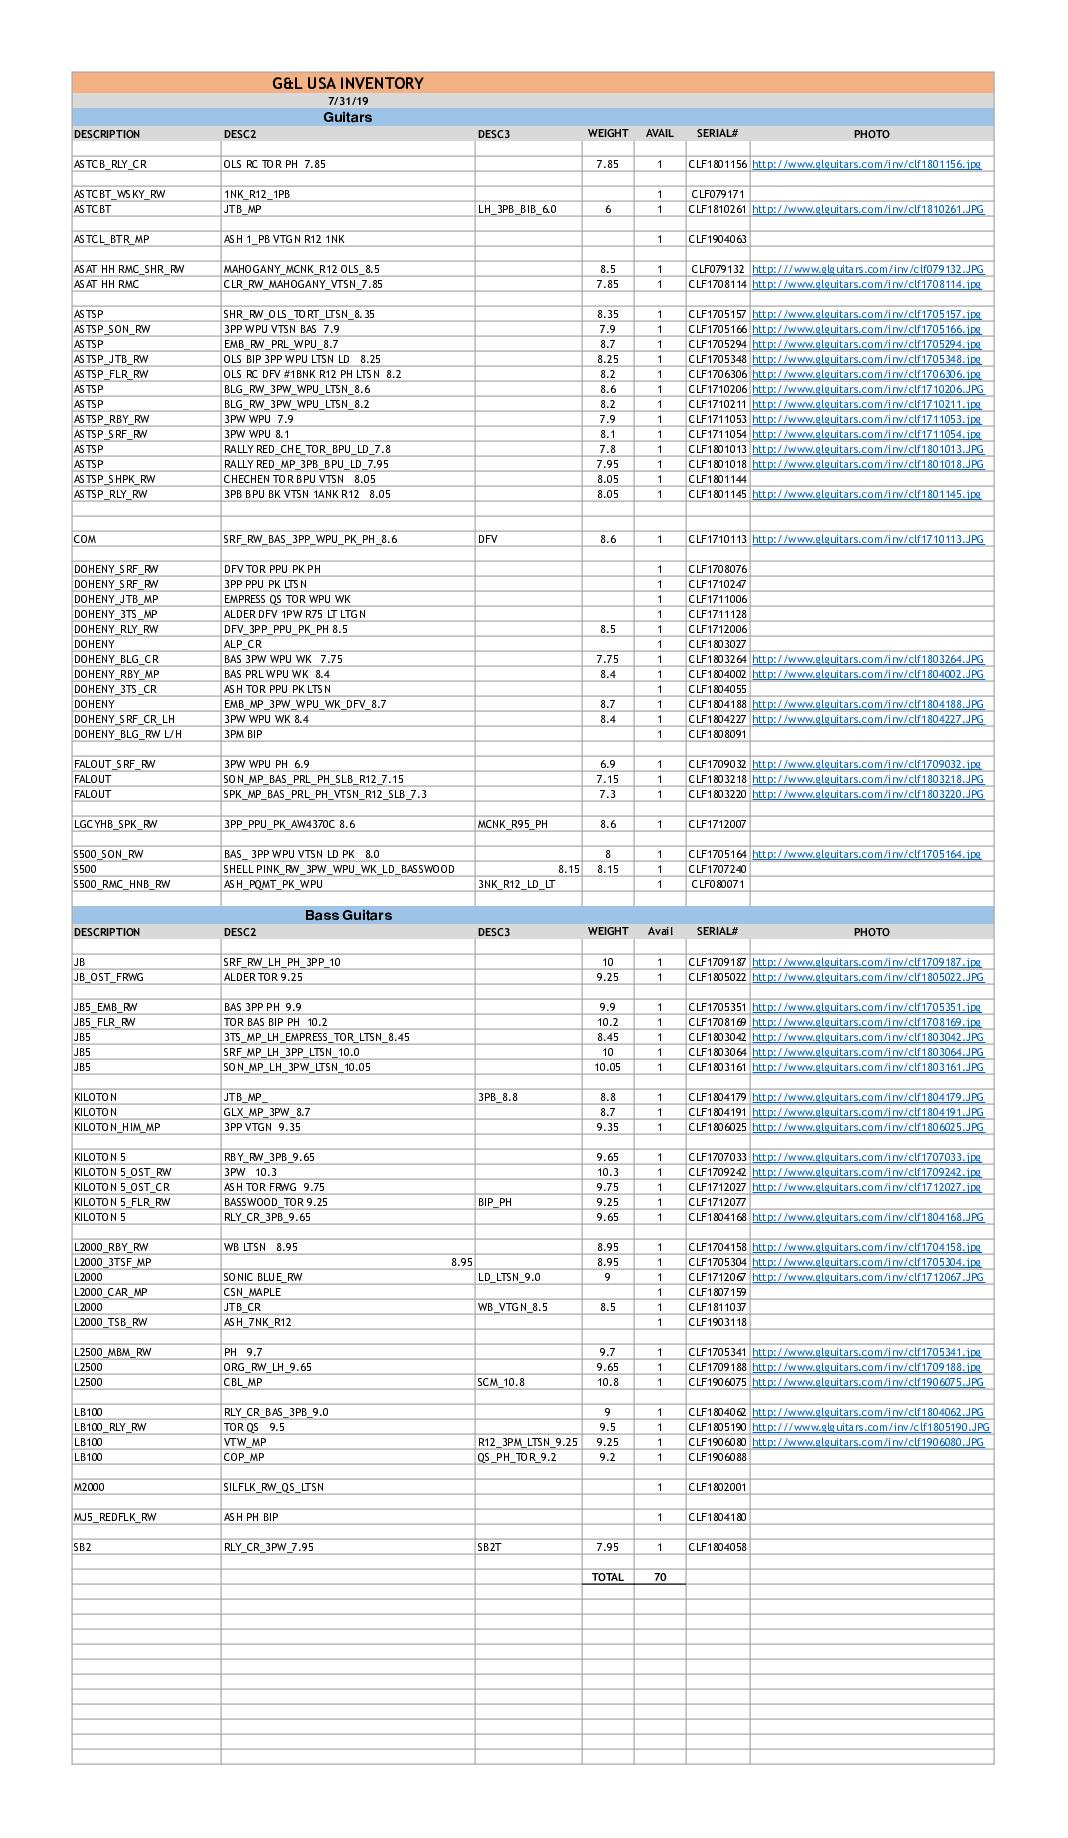 G&L Inventory-07/31/2019 (PDF) - with Option Codes